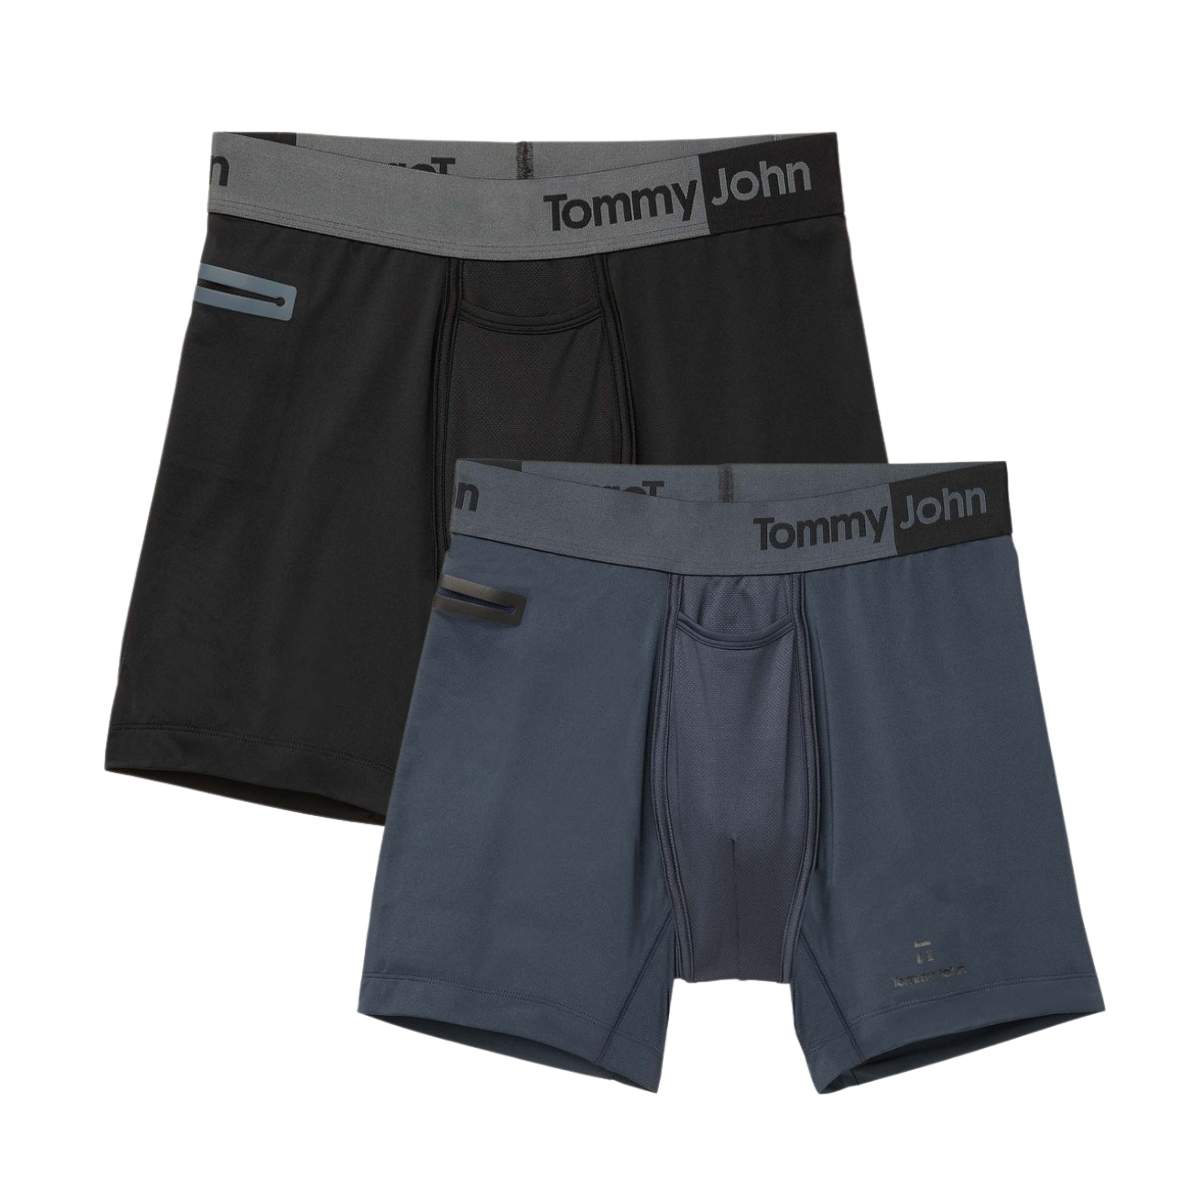 Tommy John 360 Sport Mid-Length Boxer Brief 6"